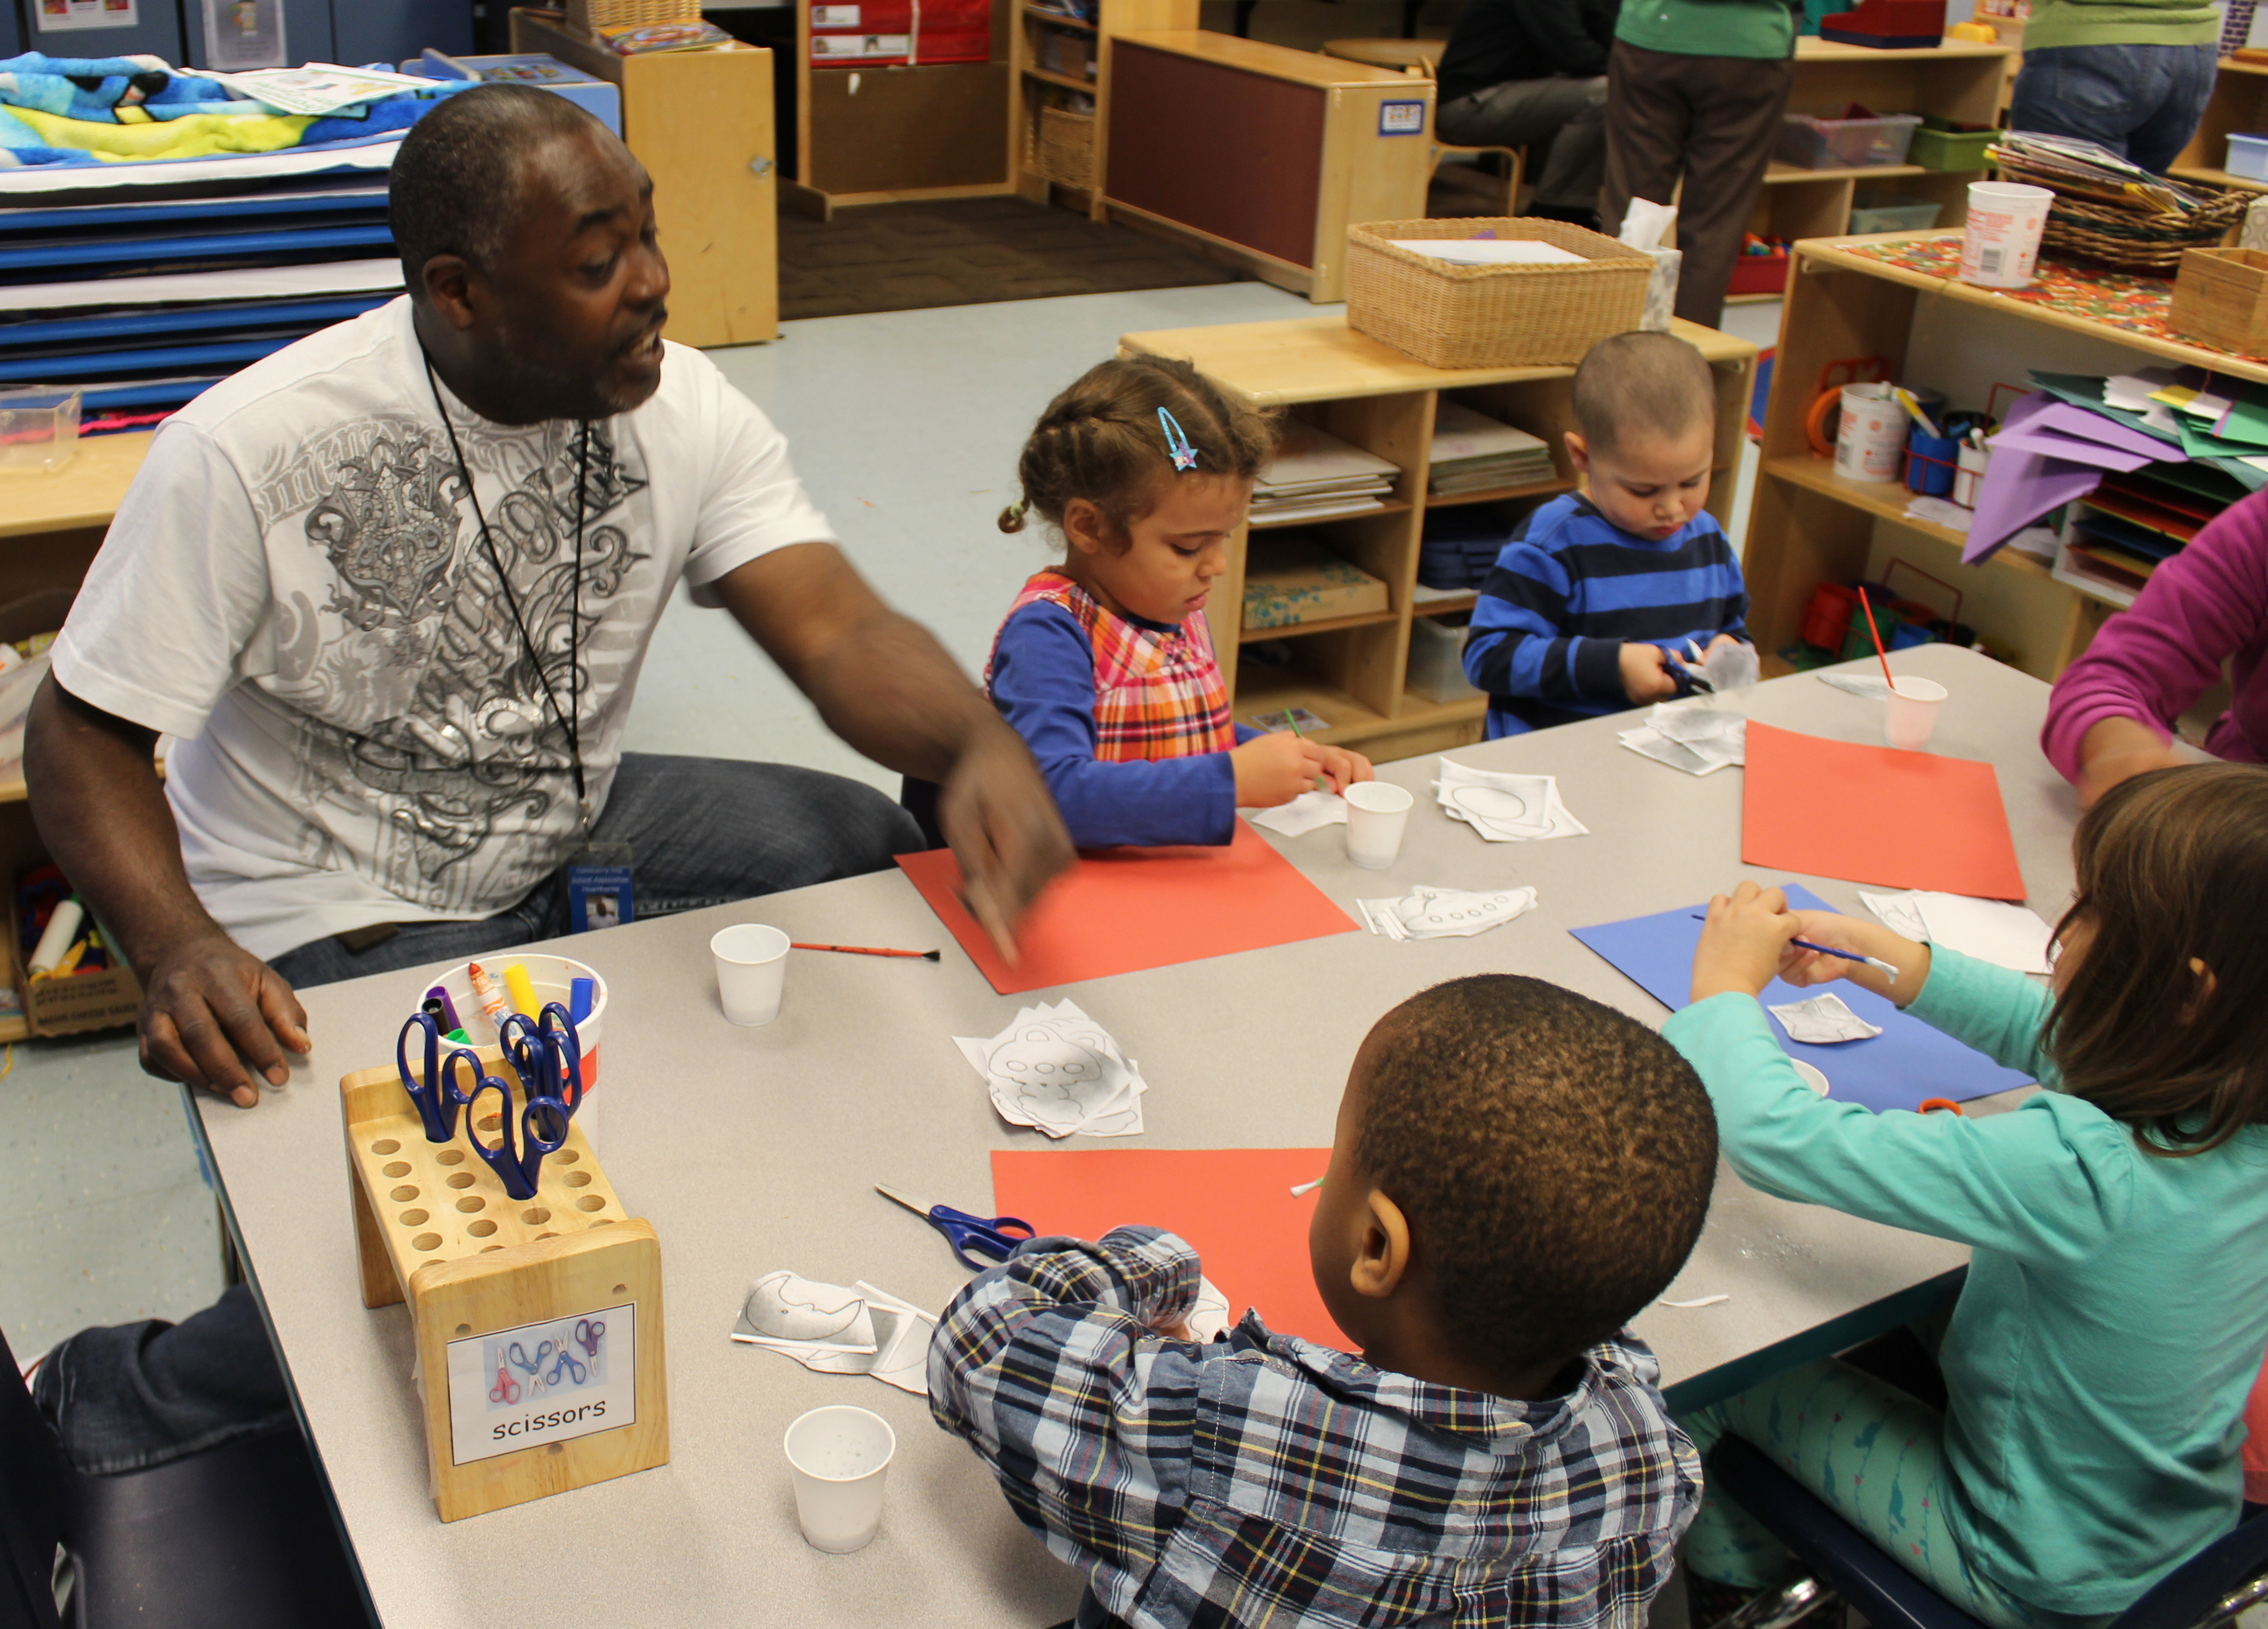 Children making crafts at preschool.^[[Image](https://www.flickr.com/photos/seattlecitycouncil/10877289634) by [Seattle City Council](https://www.flickr.com/photos/seattlecitycouncil/) is in the public domain]